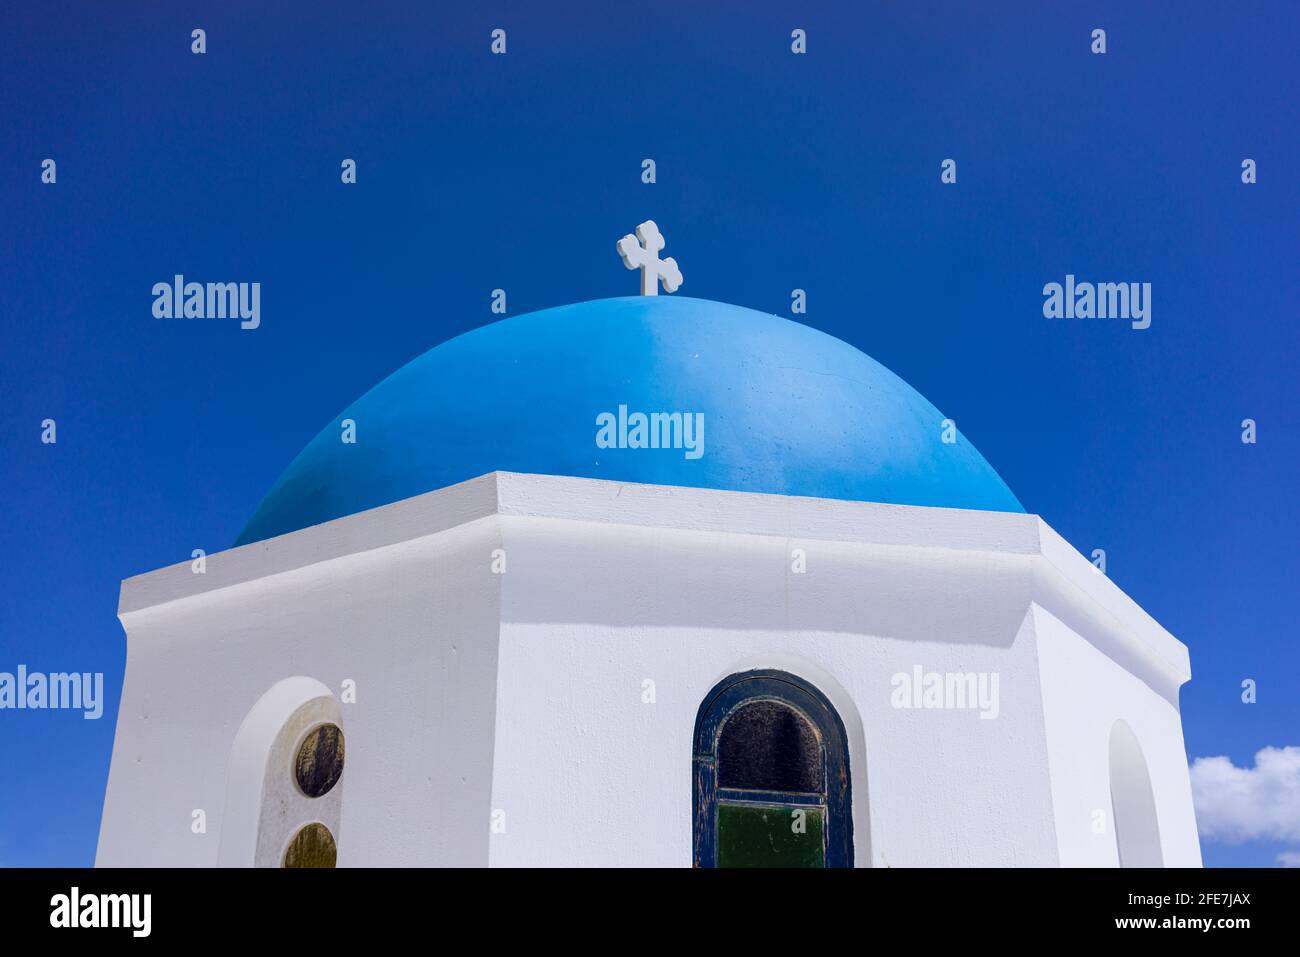 The blue dome of a church in the village of Oia on the greek island of Santorini Greece, against a deep blue sky. Stock Photo